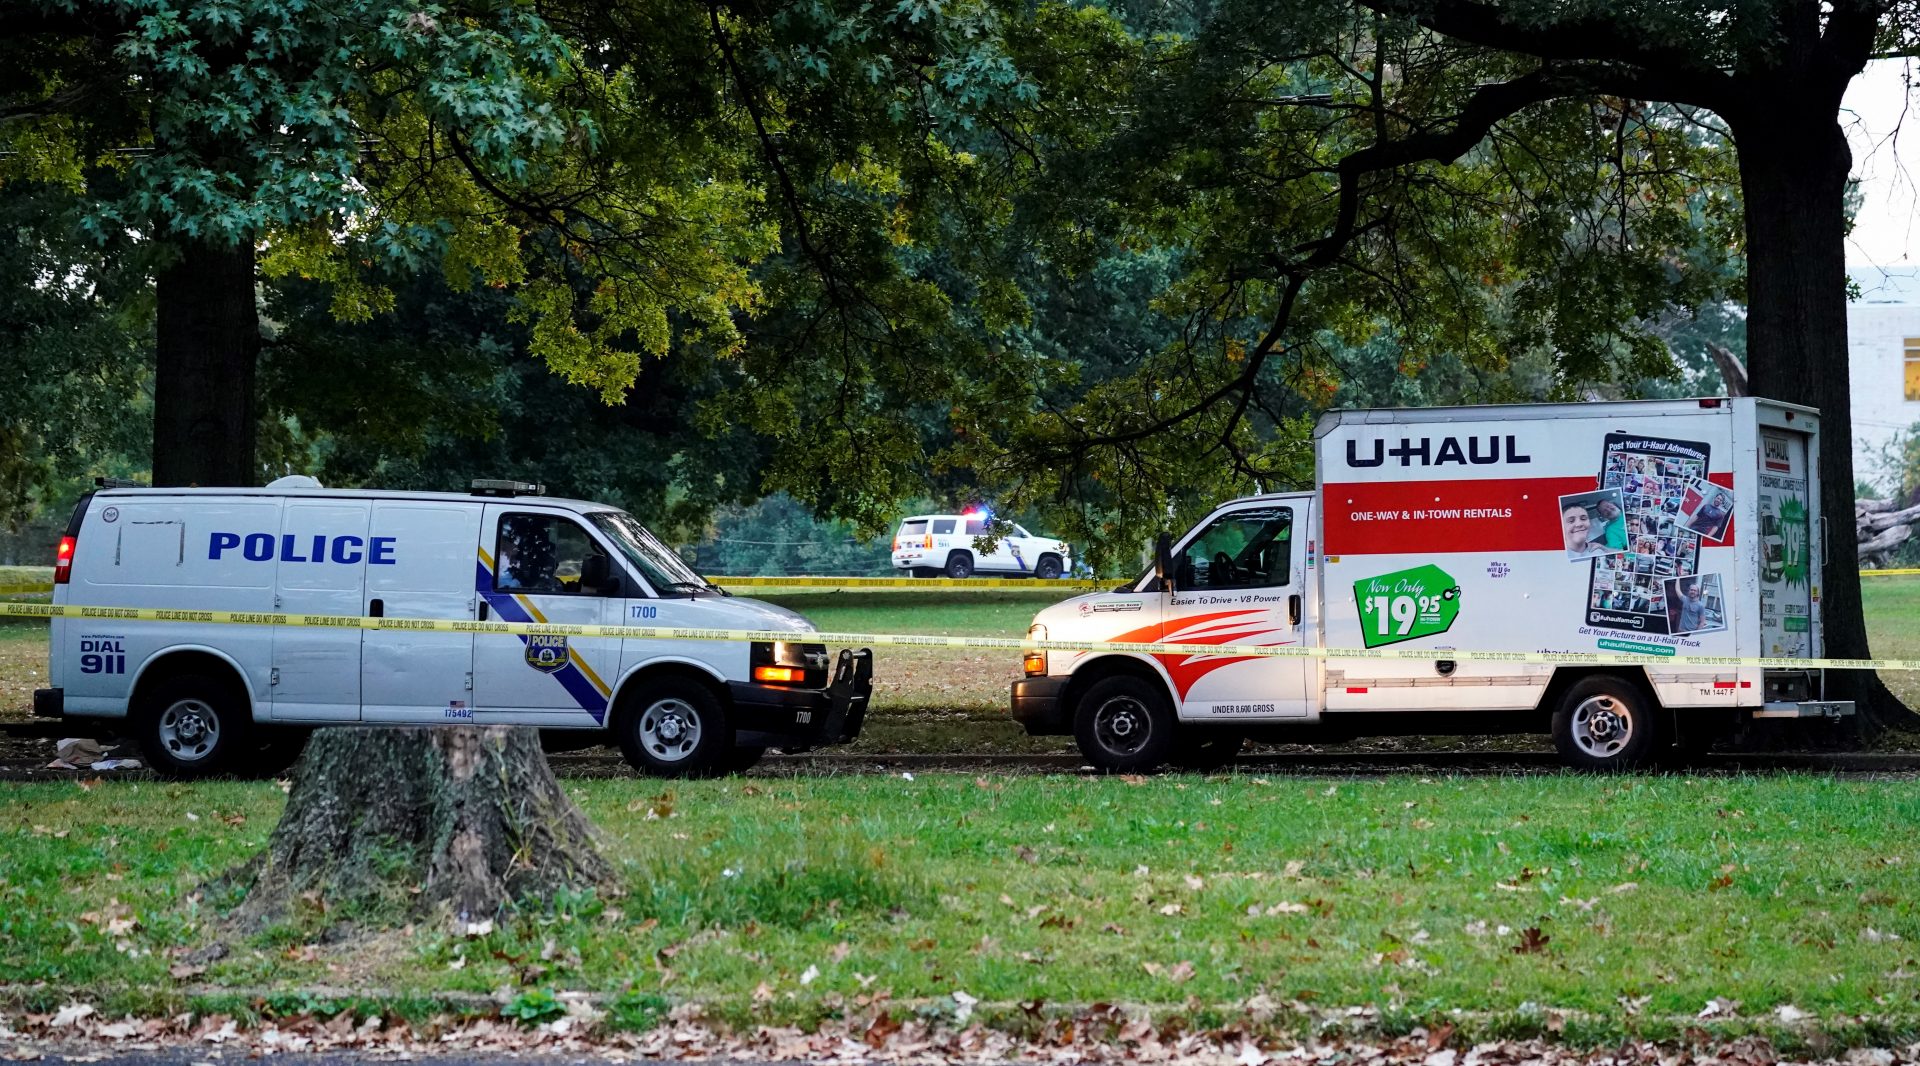 Police vehicles and a U-Haul truck are shown at a crime scene in Philadelphia, Monday, Oct. 4, 2021. Police in Philadelphia say a nurse fatally shot his co-worker at a hospital, fled the scene and was shot in a gunfight with police that wounded two officers. After the shooting, the gunman left the hospital in a U-Haul box truck. A short time later, four officers were alerted to the suspect's location by a passerby near a school.